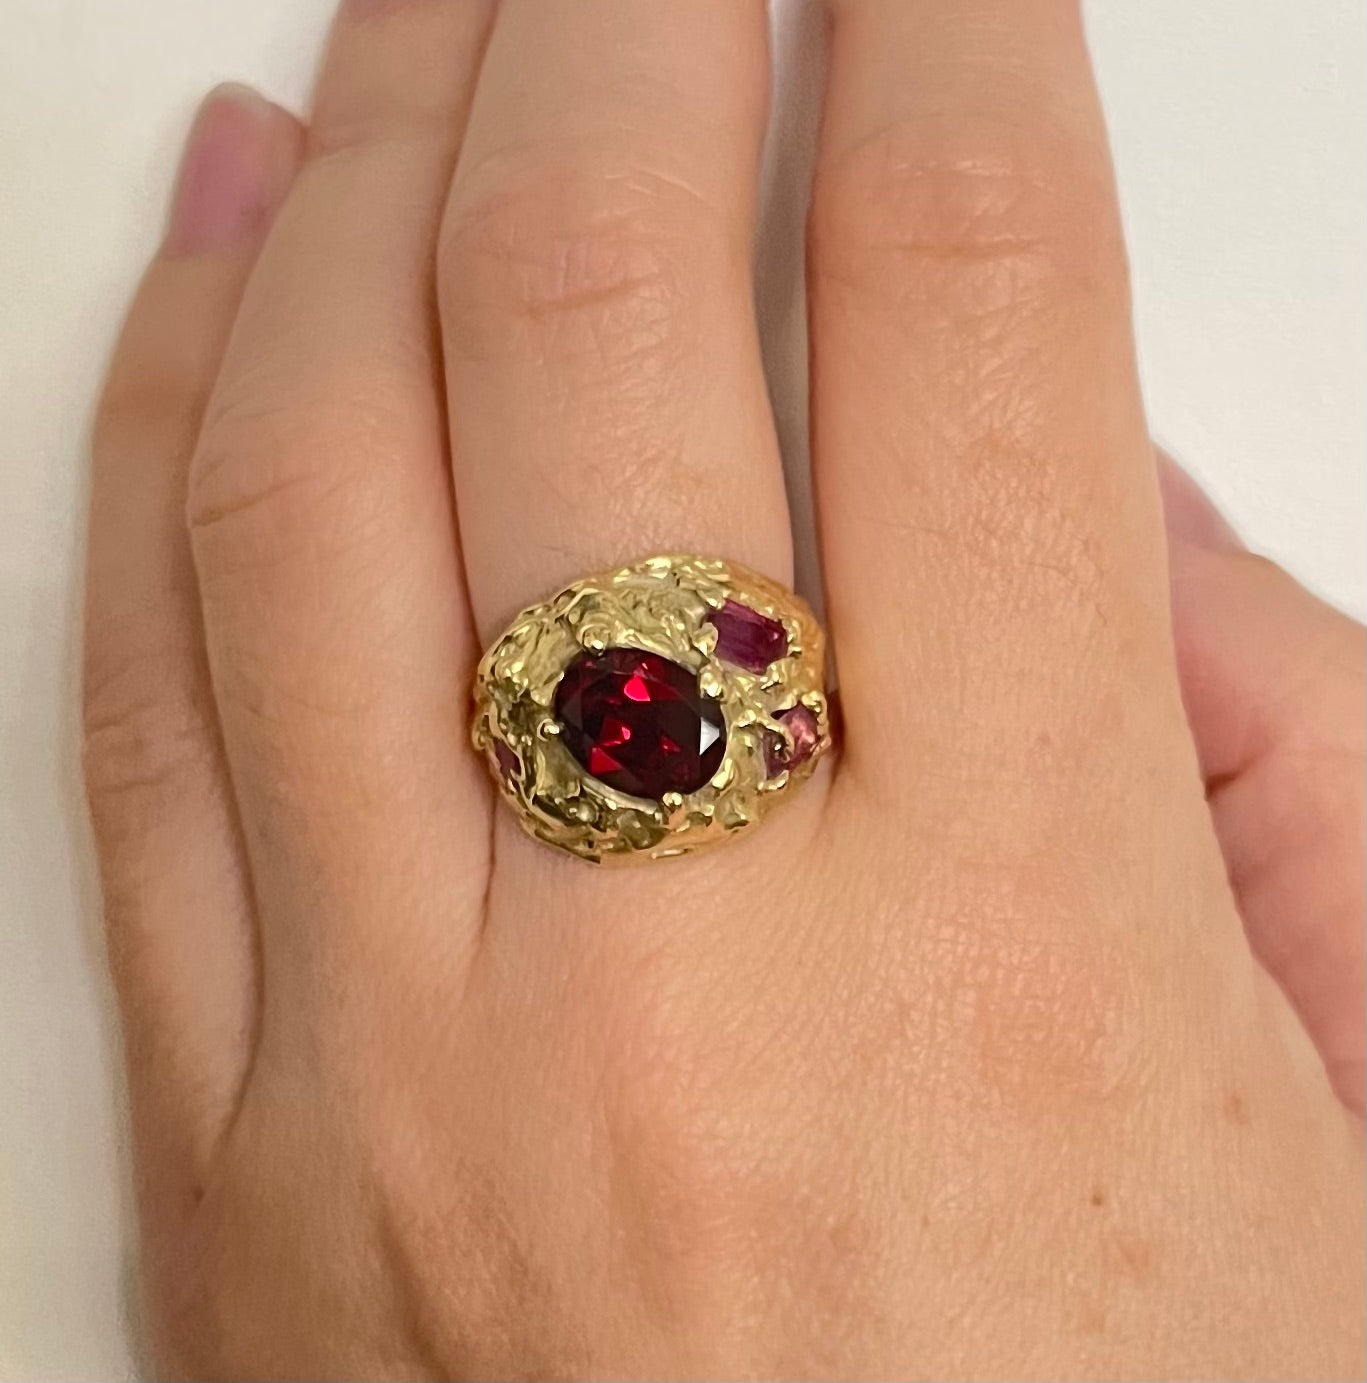 18ct Yellow Gold Ring with Sri Lankan Garnet and Pink Sapphires